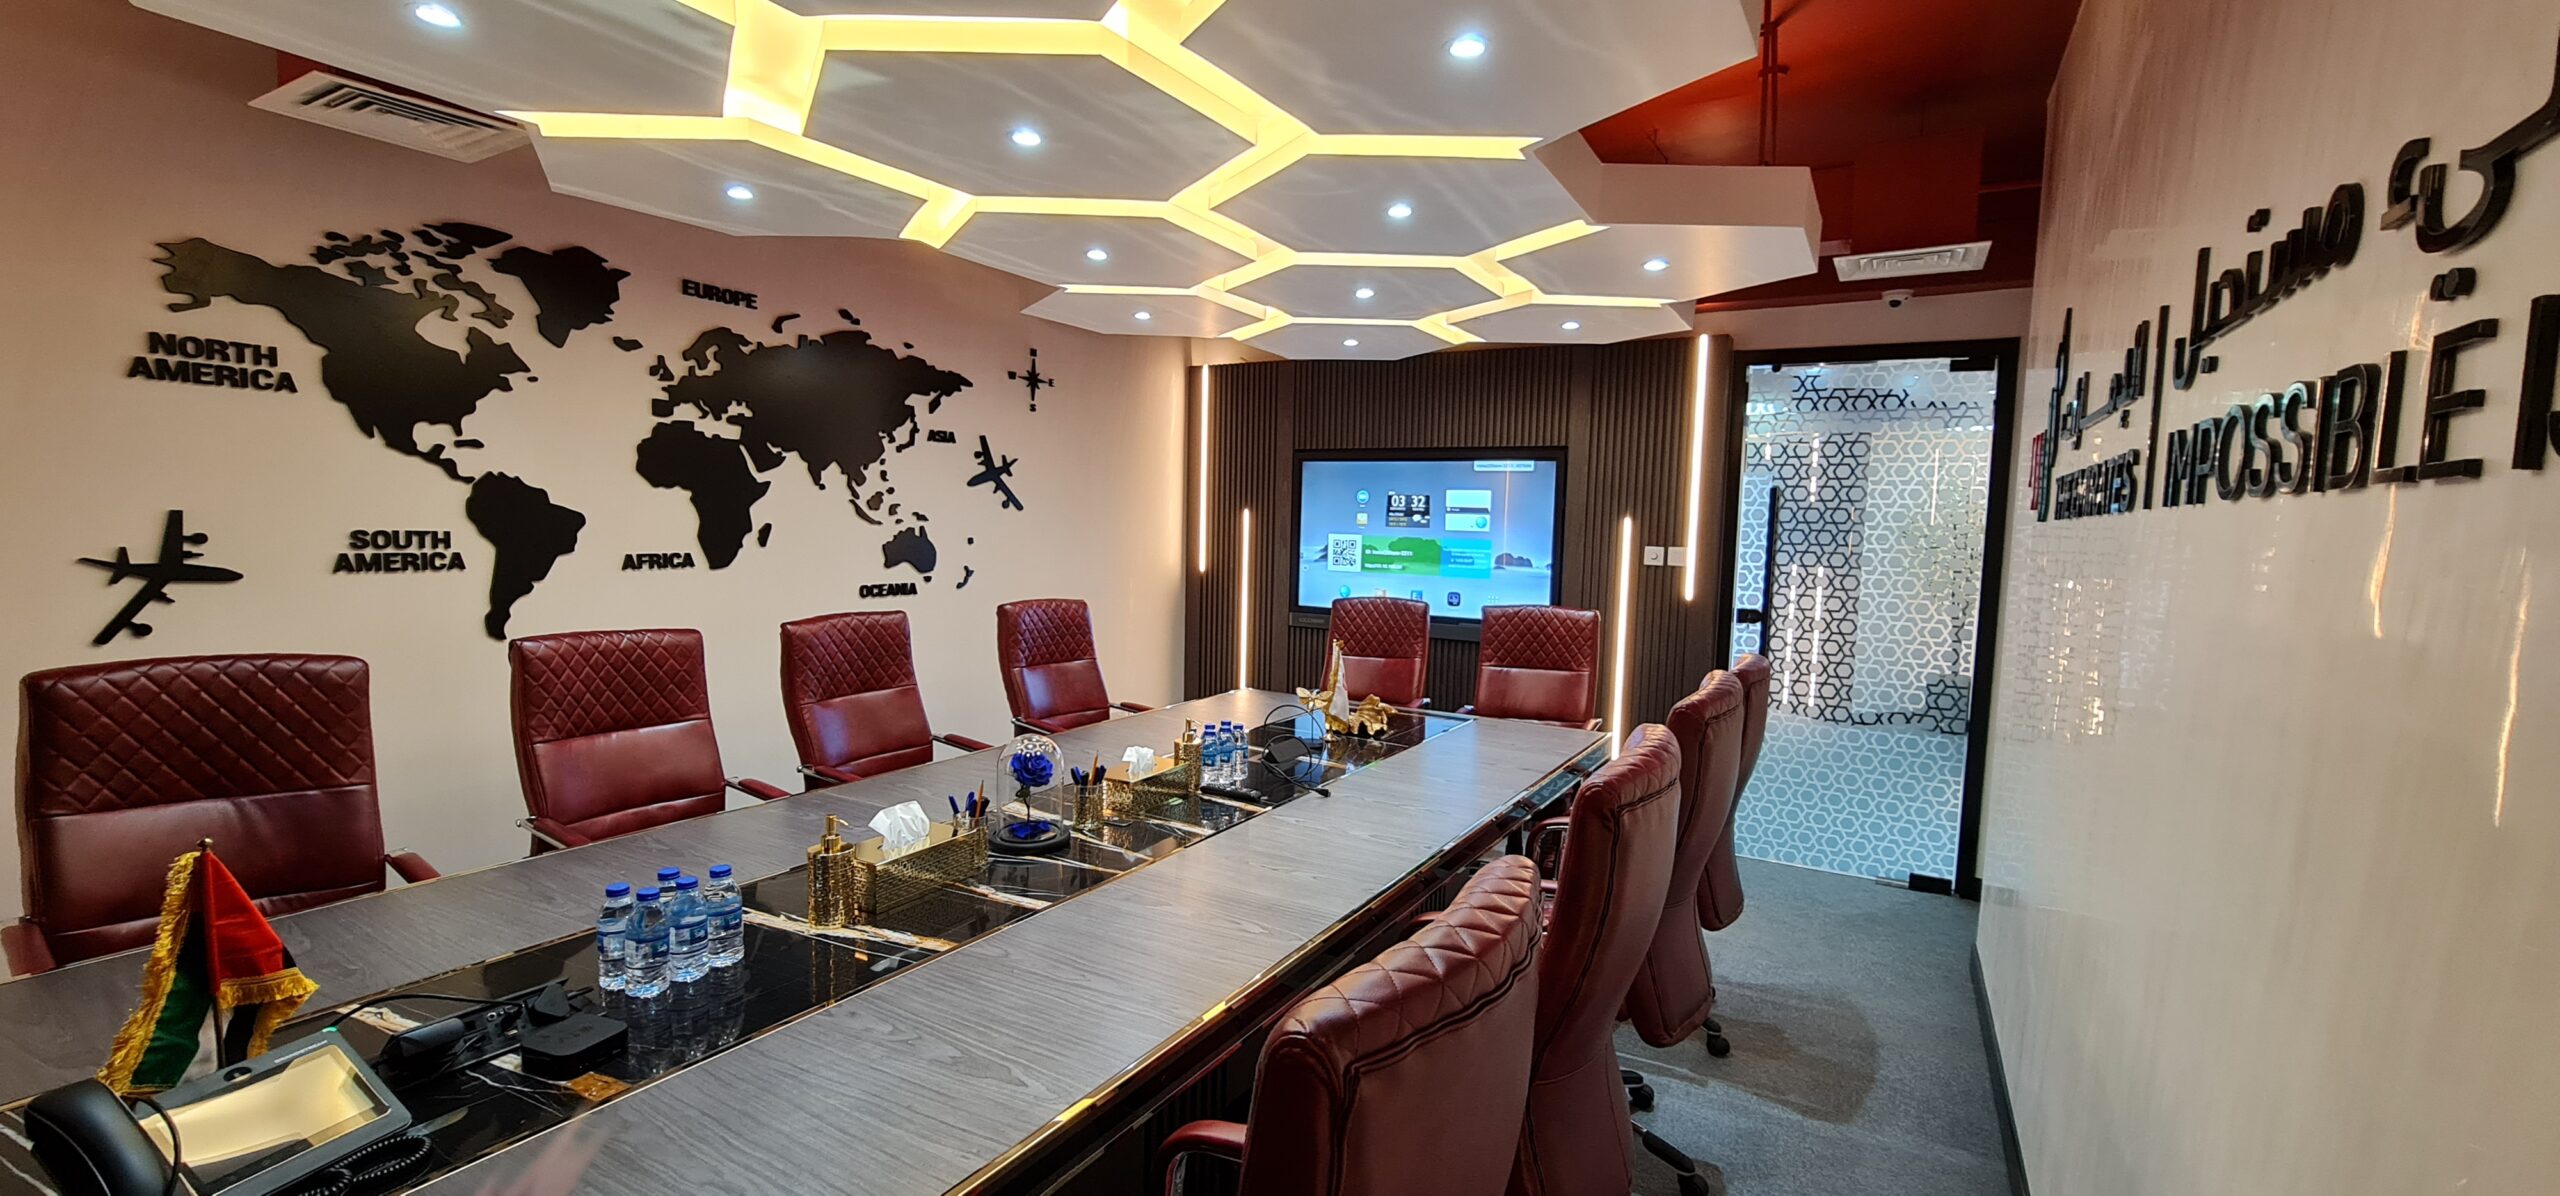 a conference room with red chairs and a map on the wall